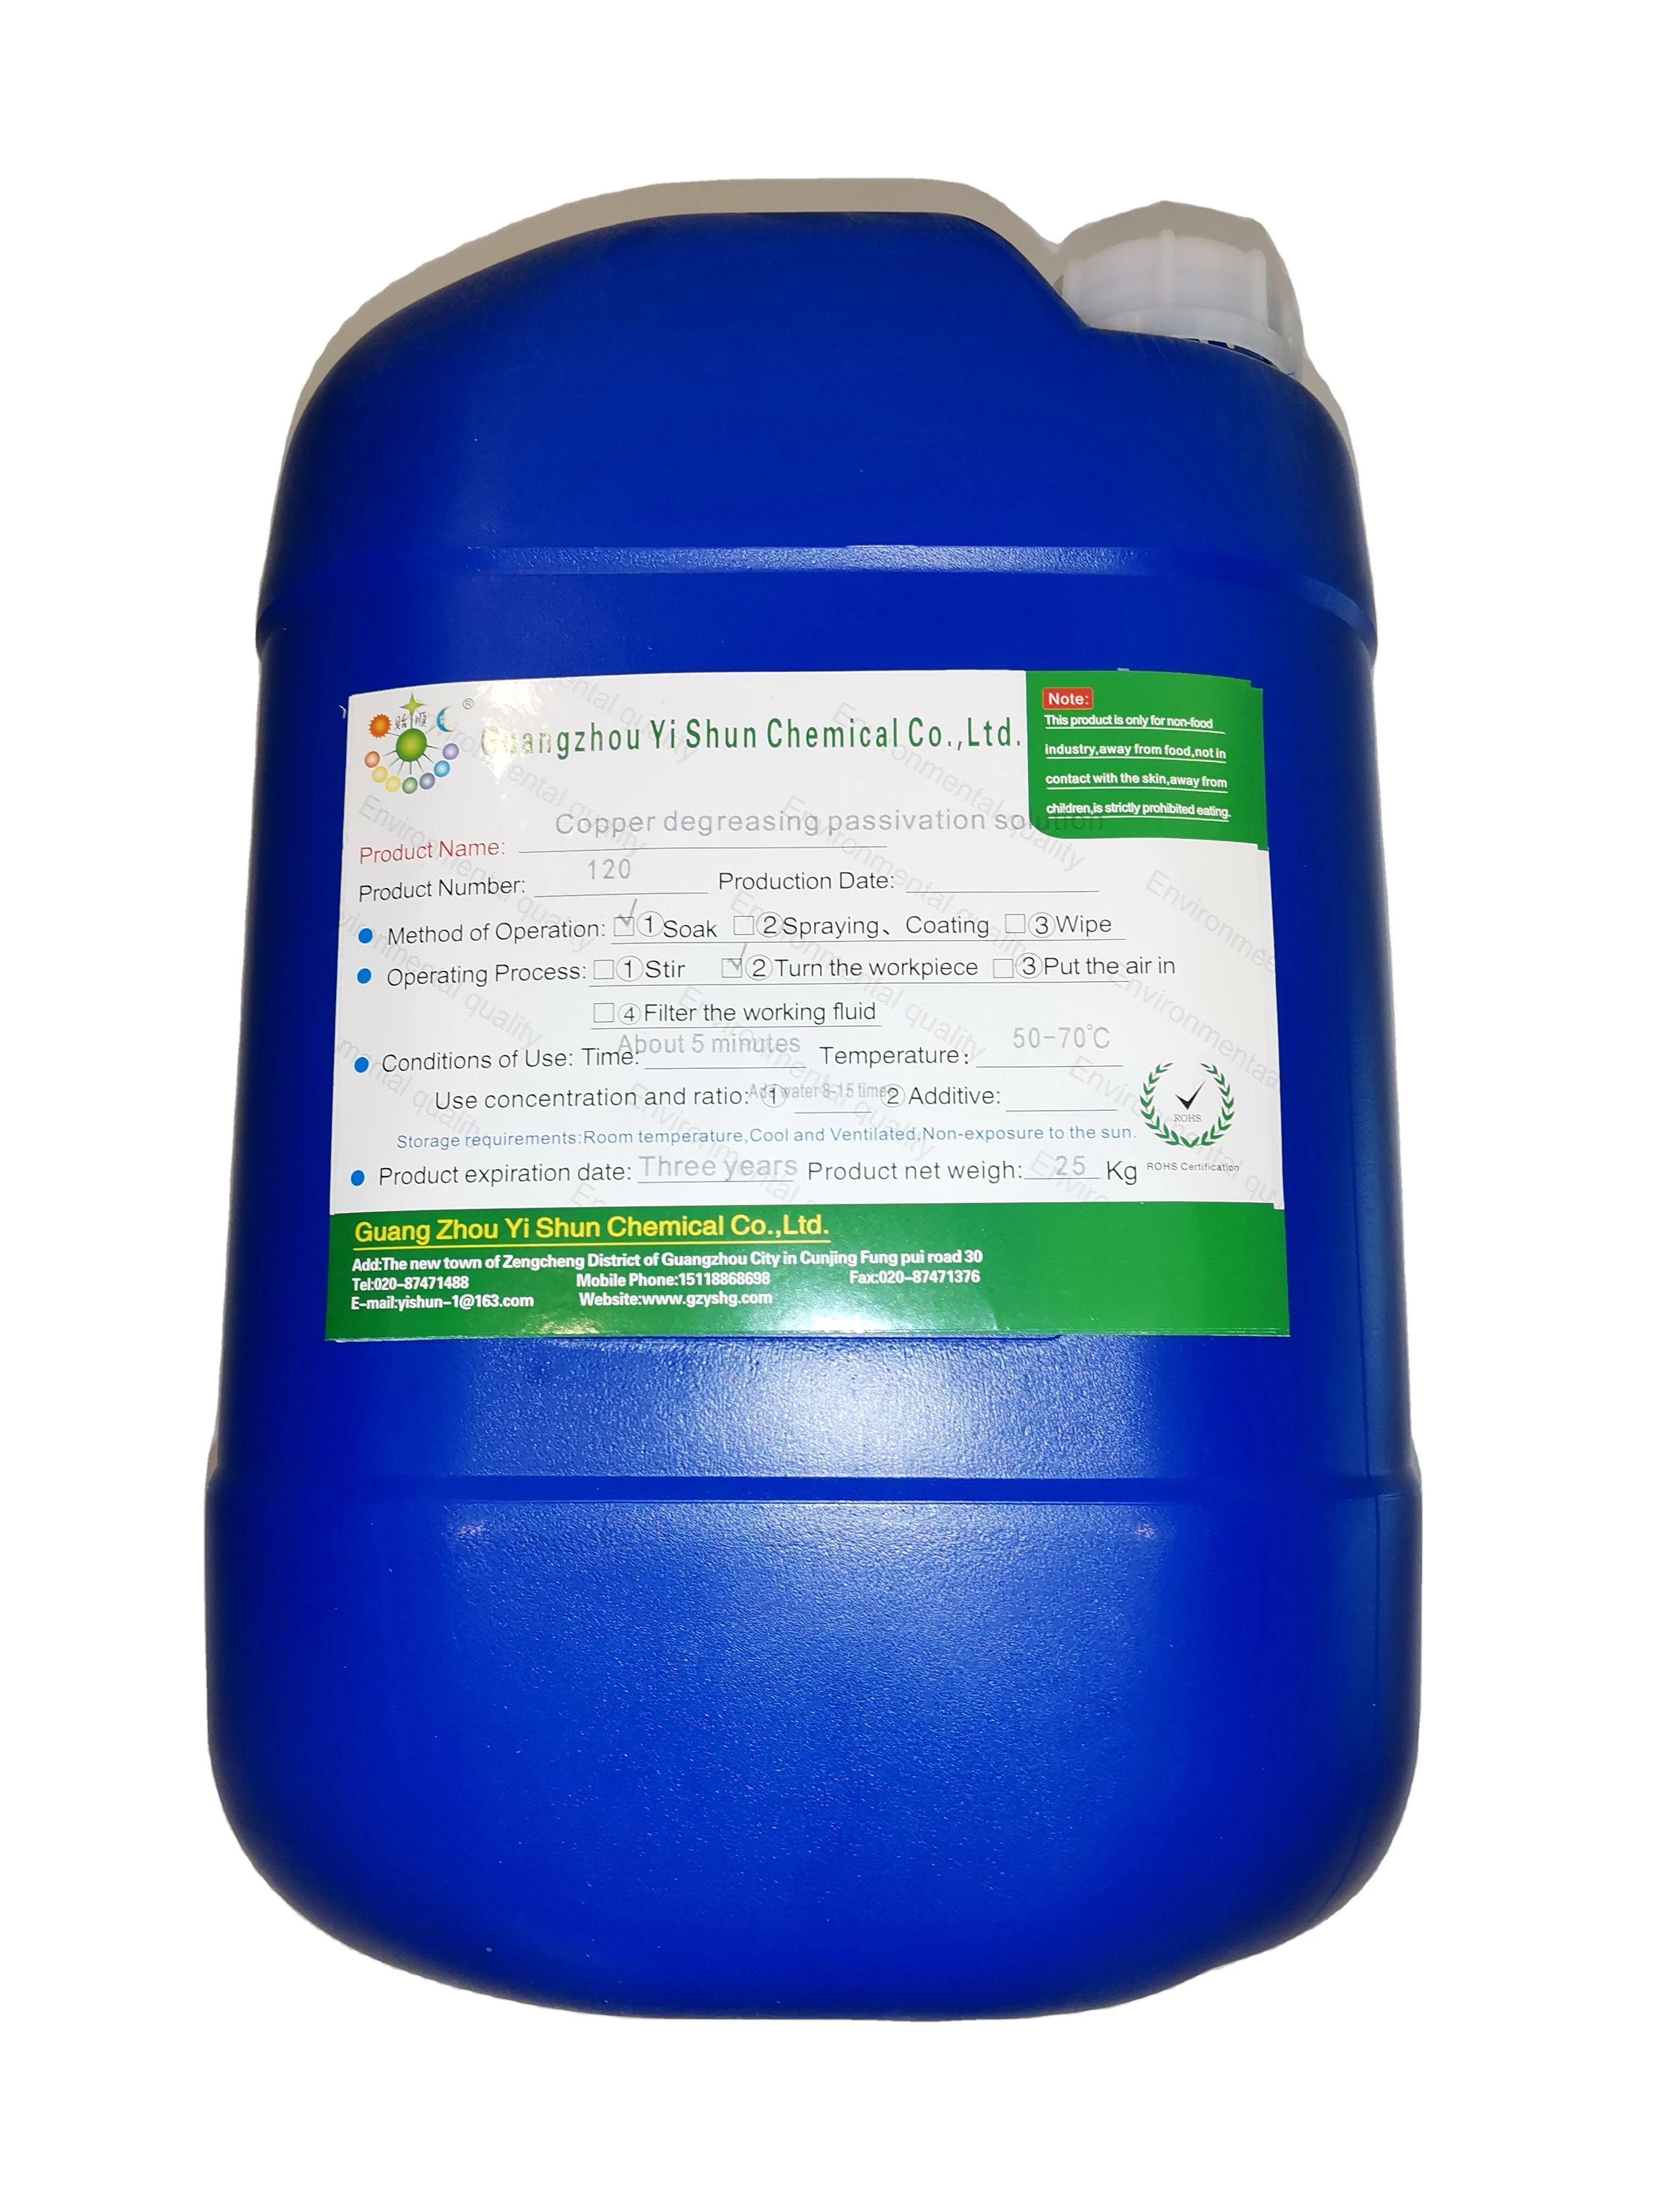 Environmental protection new copper oil removal passivation agent